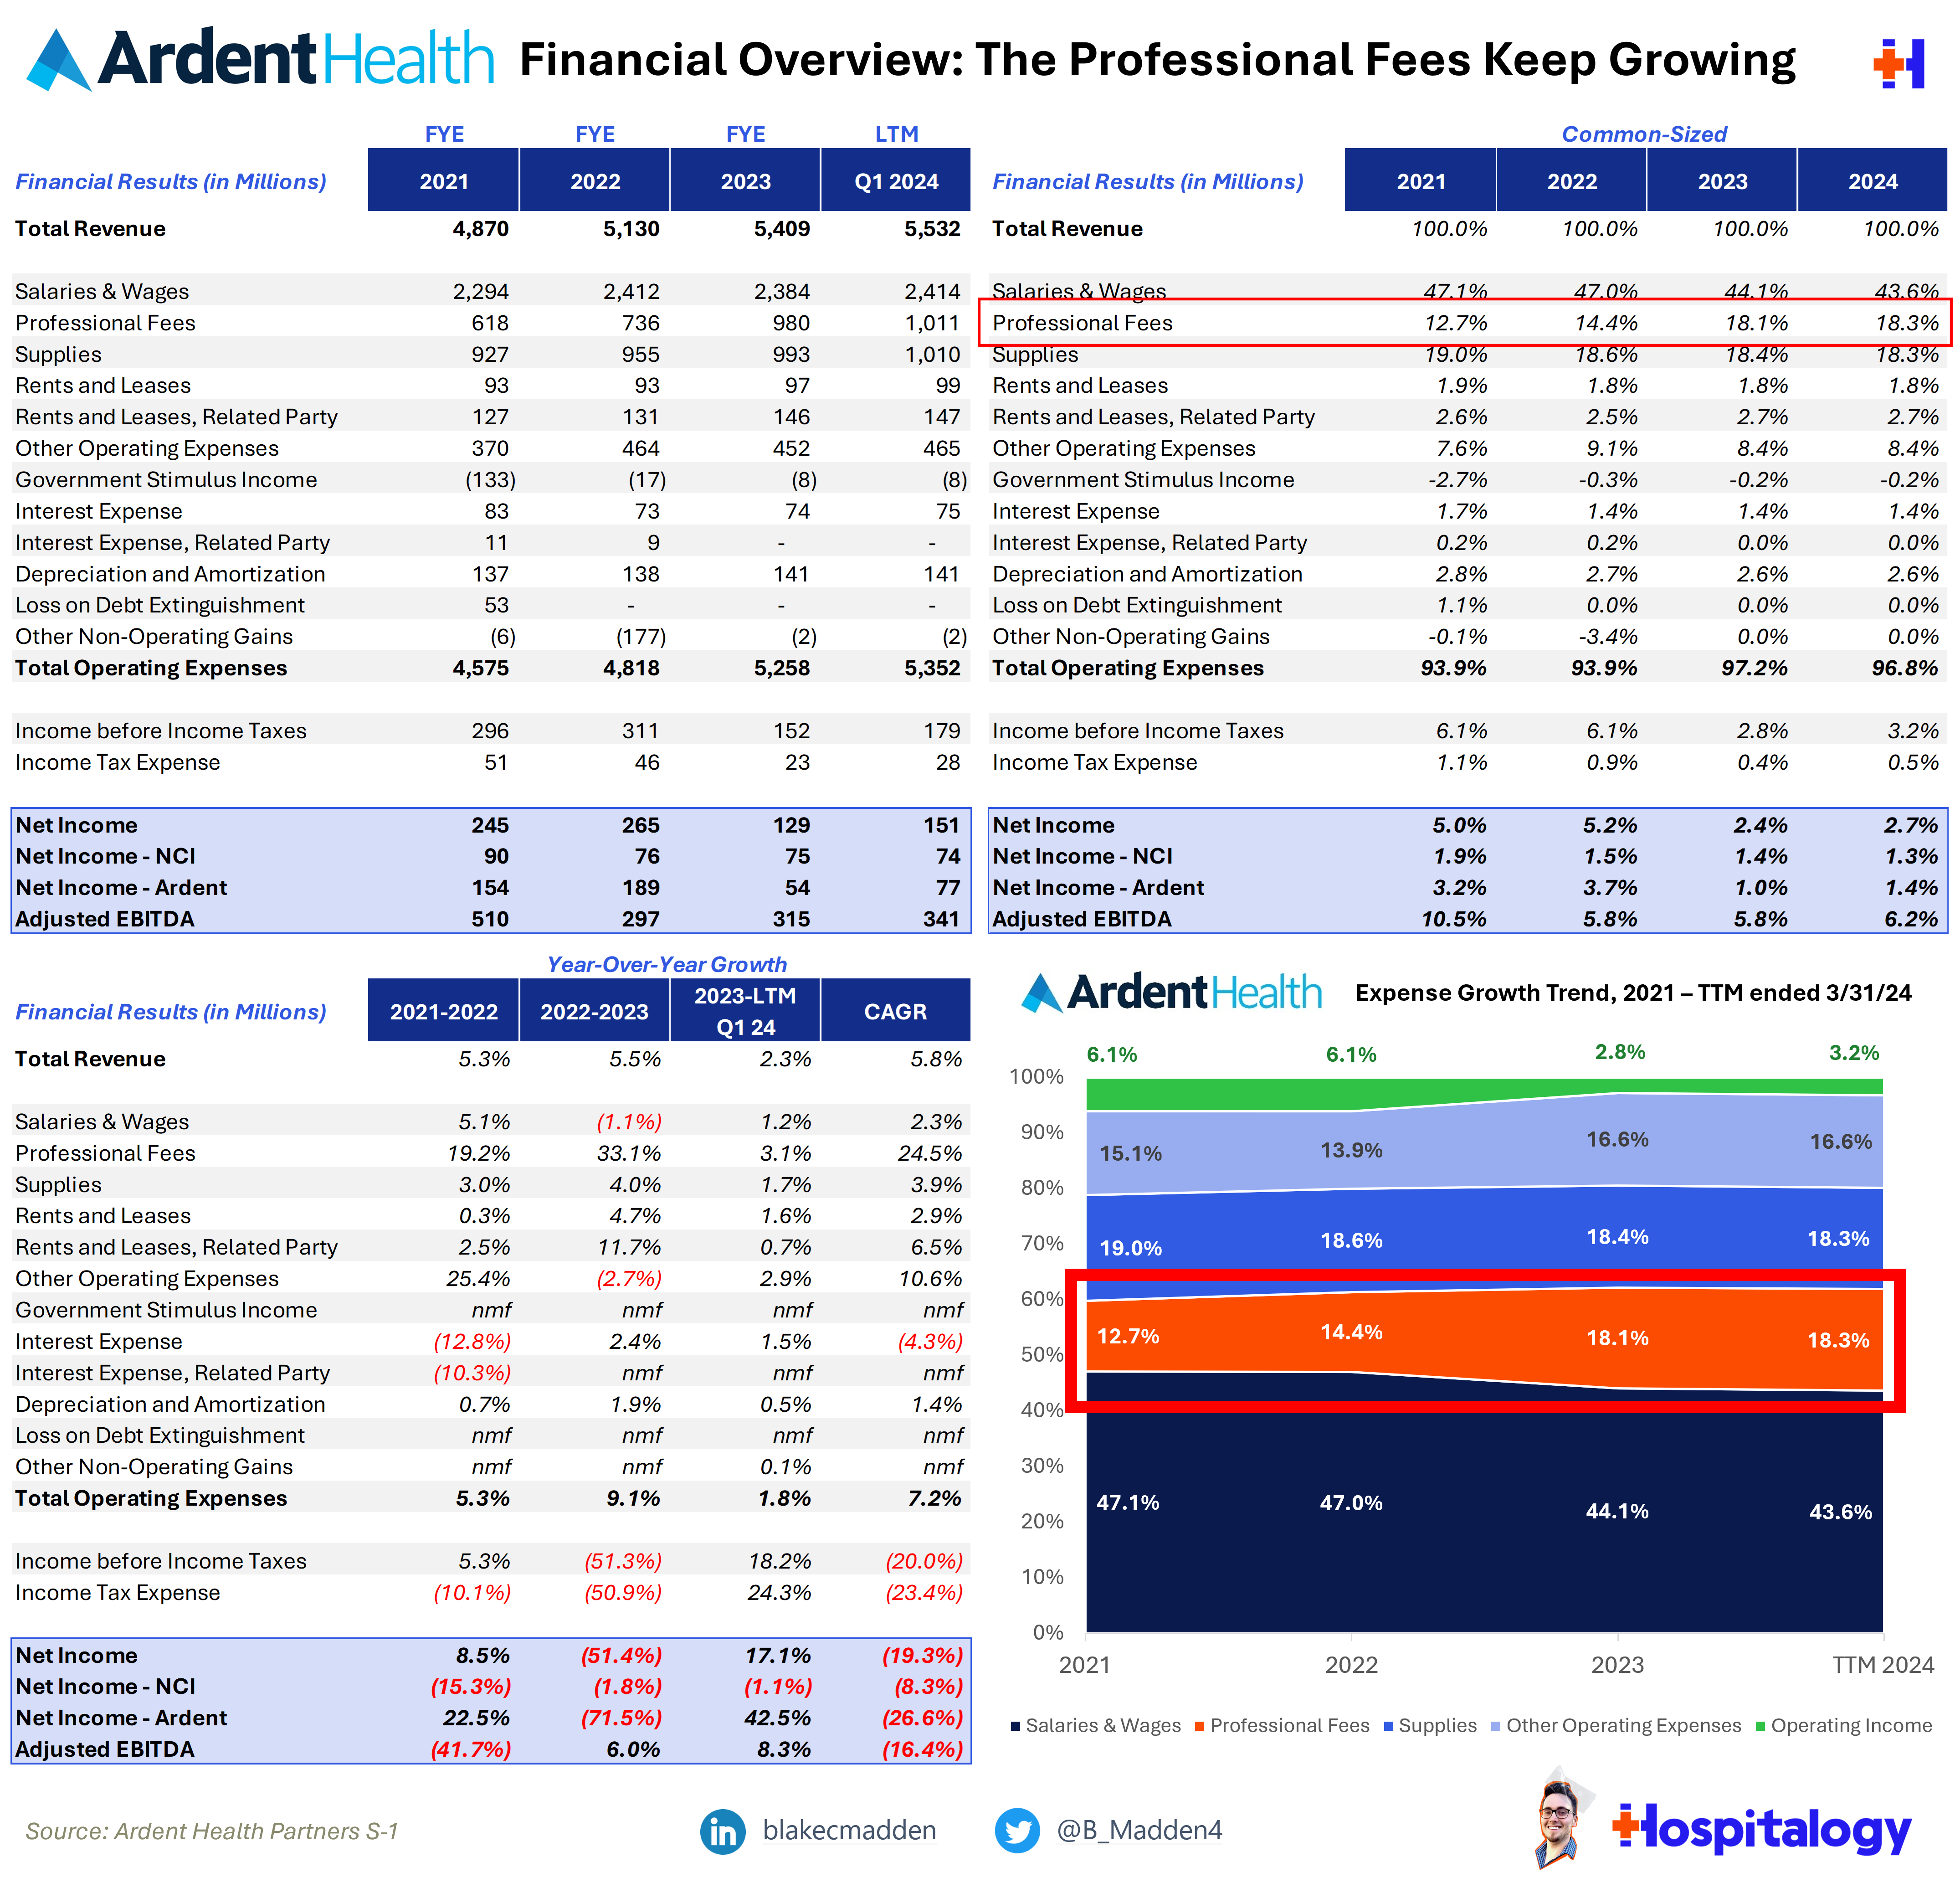 Ardent Health Goes Public, Commure acquires Augmedix, and Surgery Partners up for Sale? - Hospitalogy